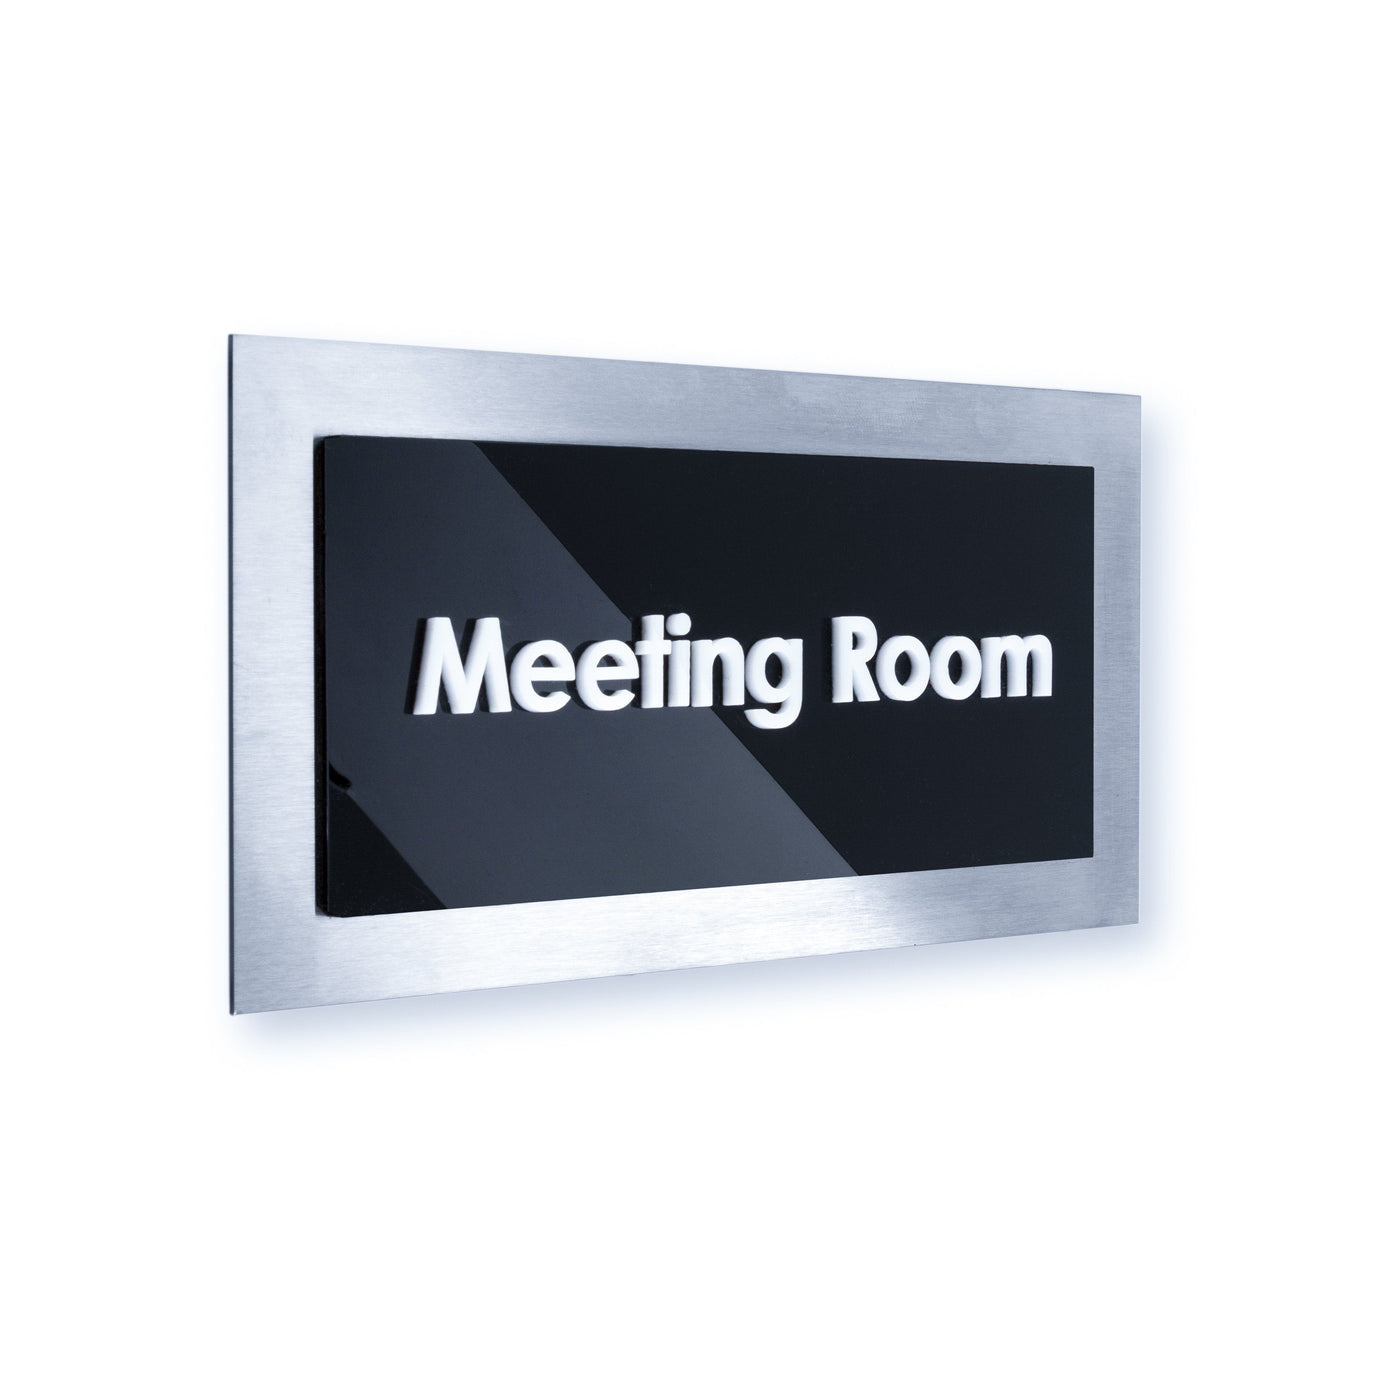 Door Signs - Counselor Sign - Stainless Steel Plate - "Modern" Design